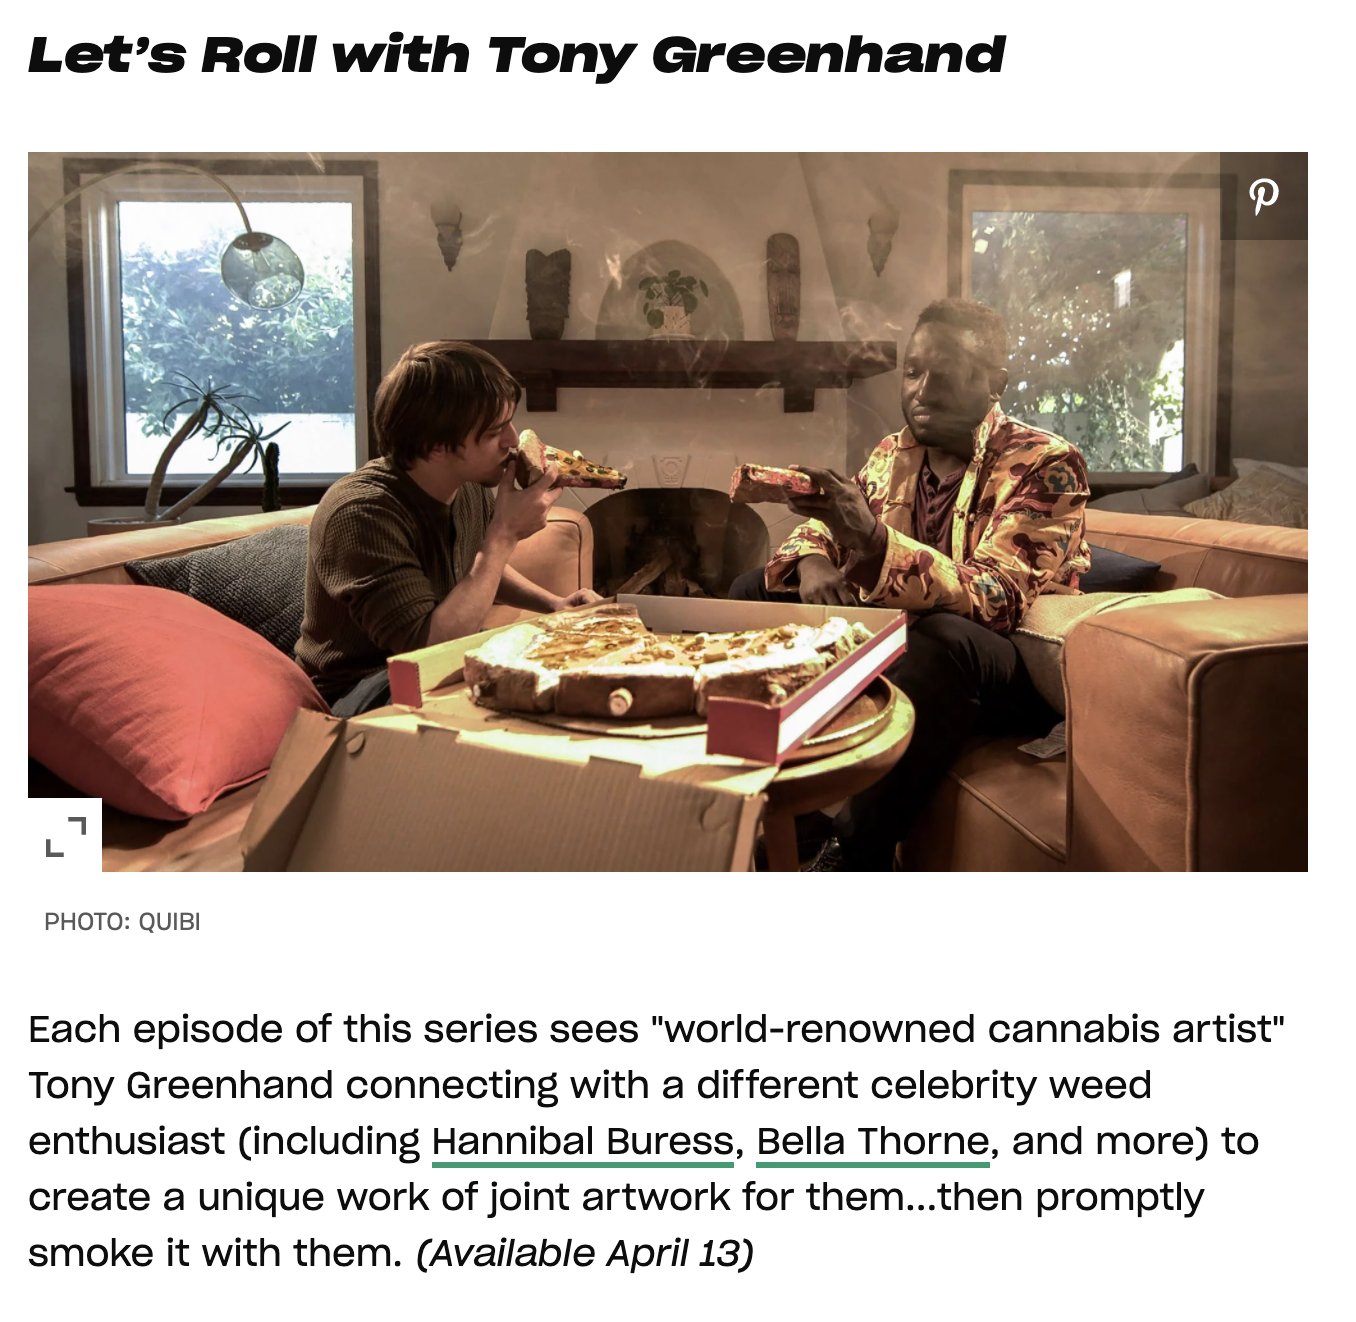 quibi show titles - let's roll with tony greenhand each episode of this series sees world renowned cannabis artist tony greenhand connecting wit ha different celebrity weed enthusiast. Including hannibal buress, bella thorne, and more to create a unique w